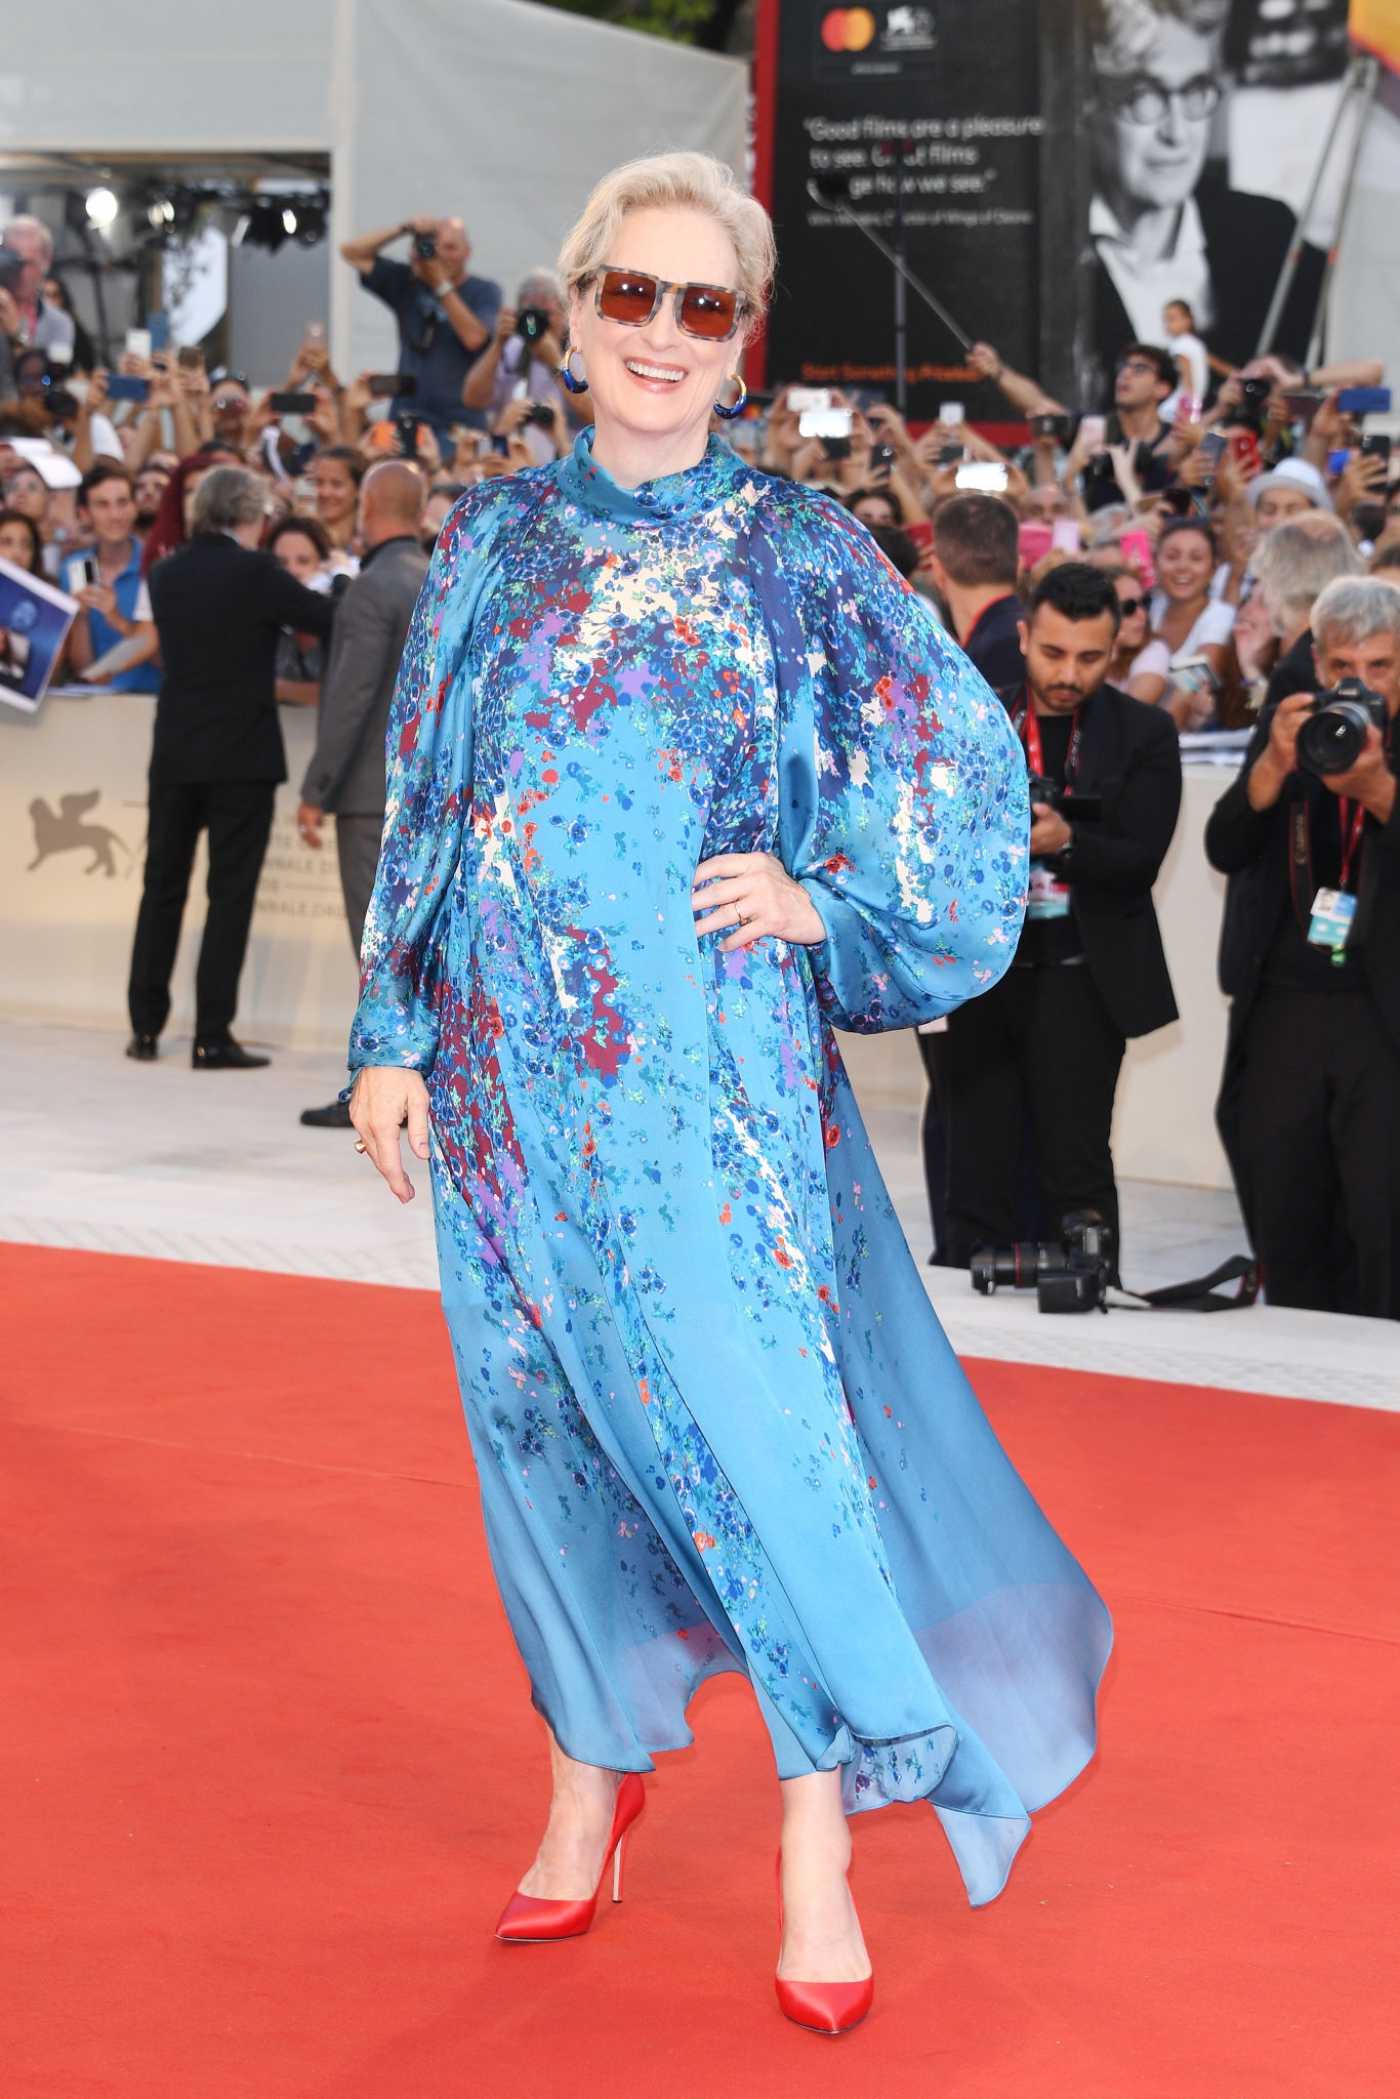 Meryl Streep Attends The Laundromat Screening During the 76th Venice Film Festival in Venice 09/01/2019